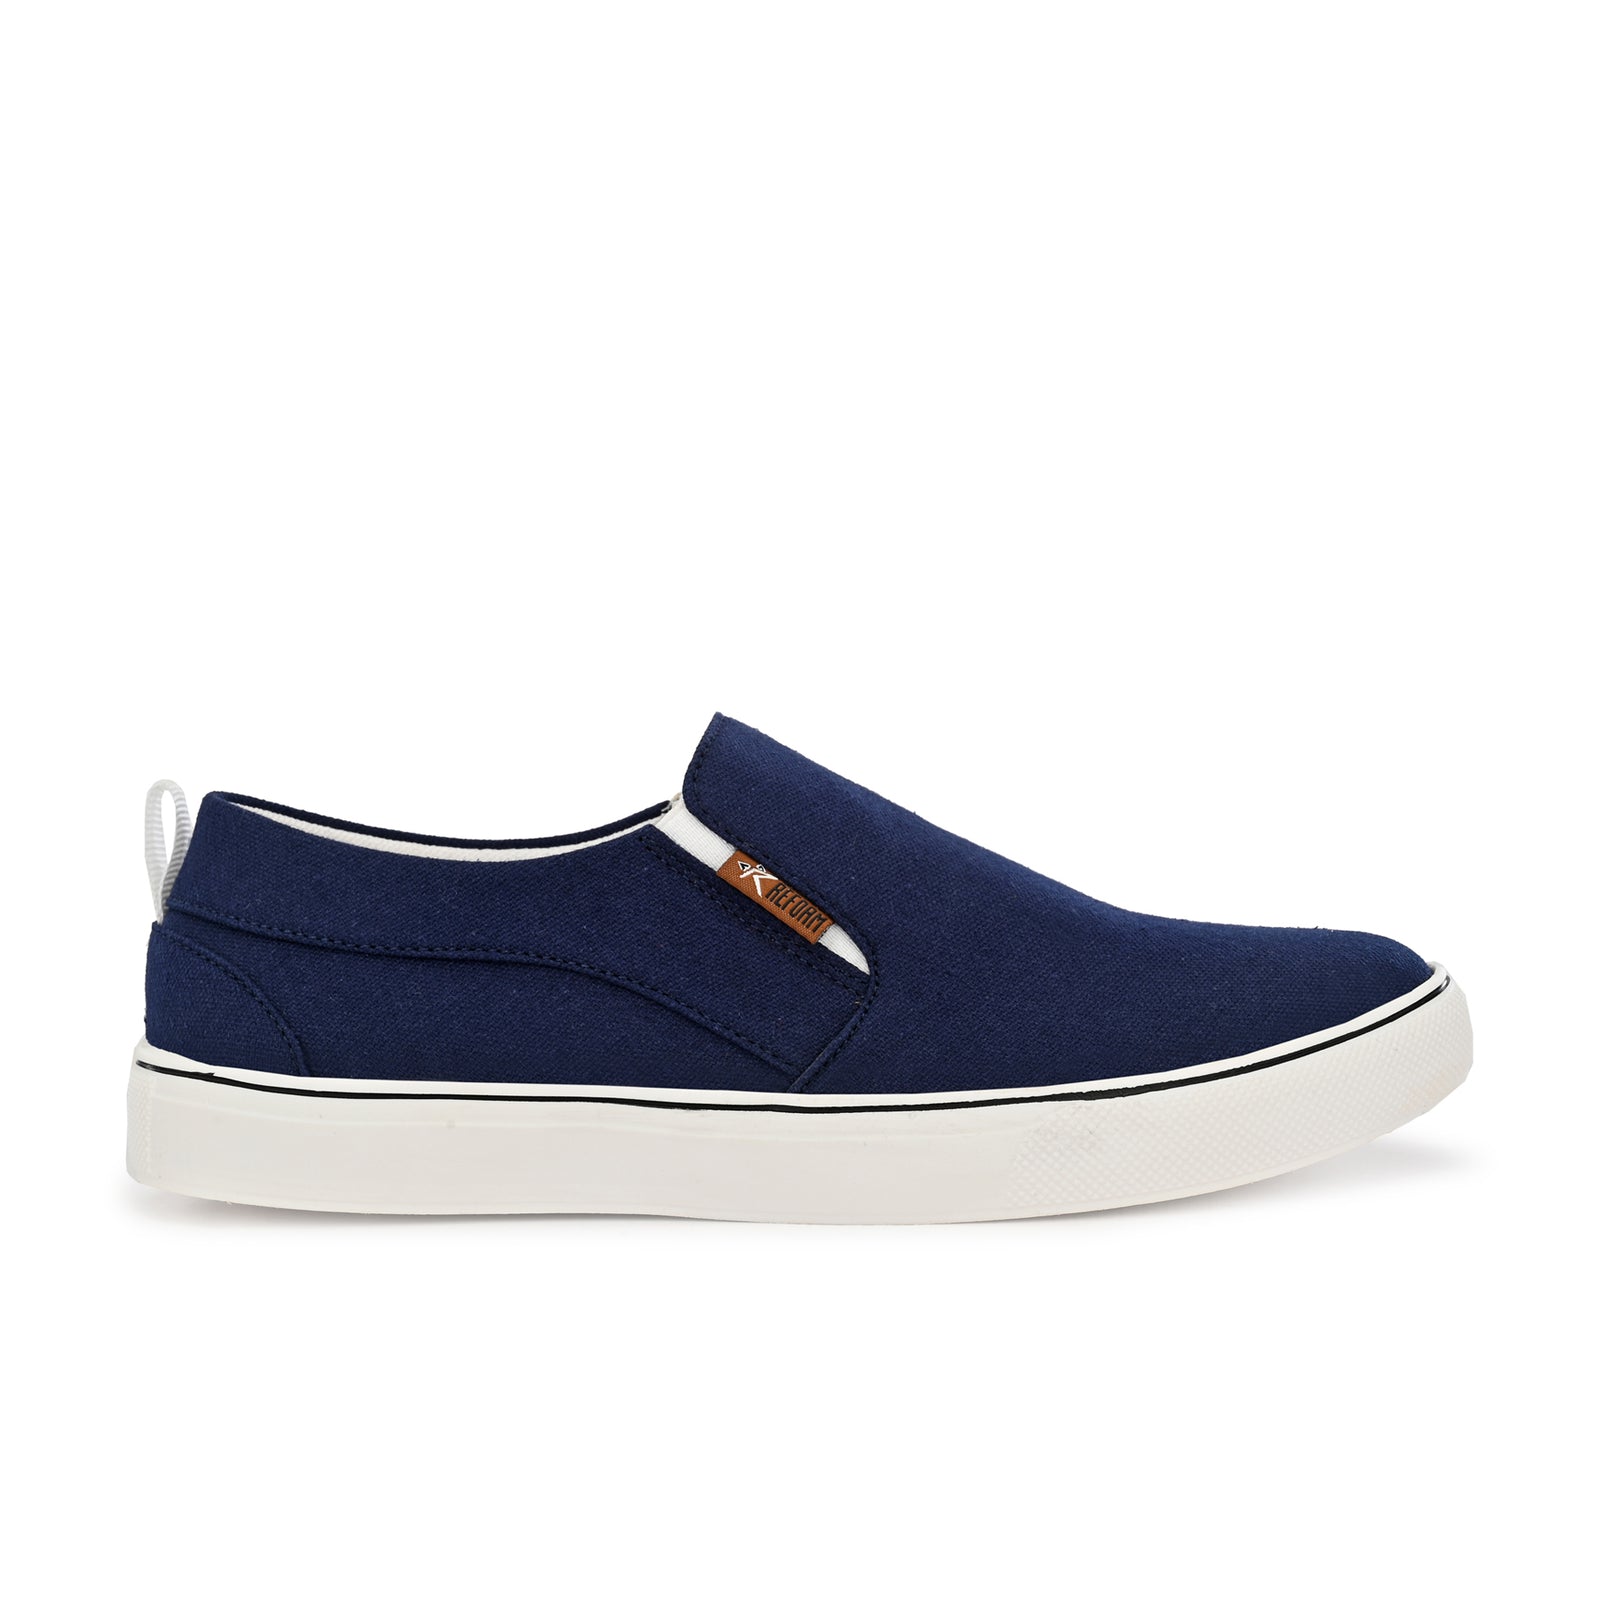 Navy Blue Solid Fabric Slip On Lifestyle Casual Shoes For Men